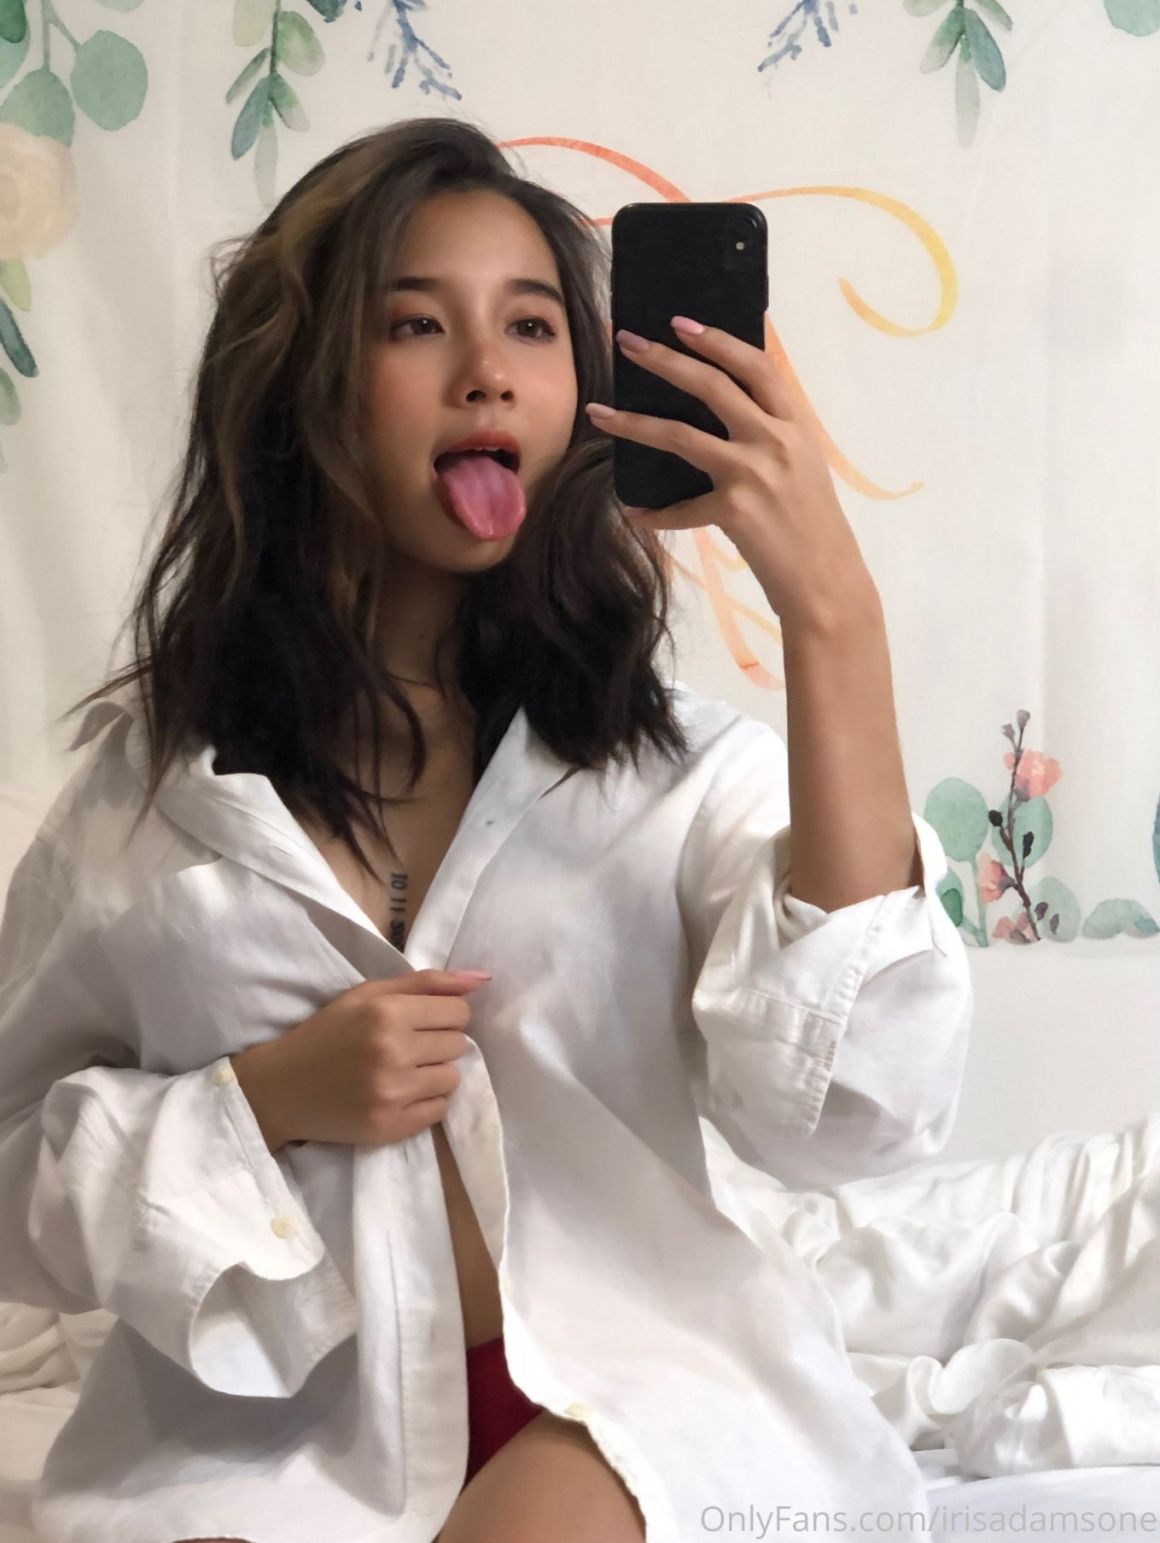 AsianOnlyfans 036 189 20210822